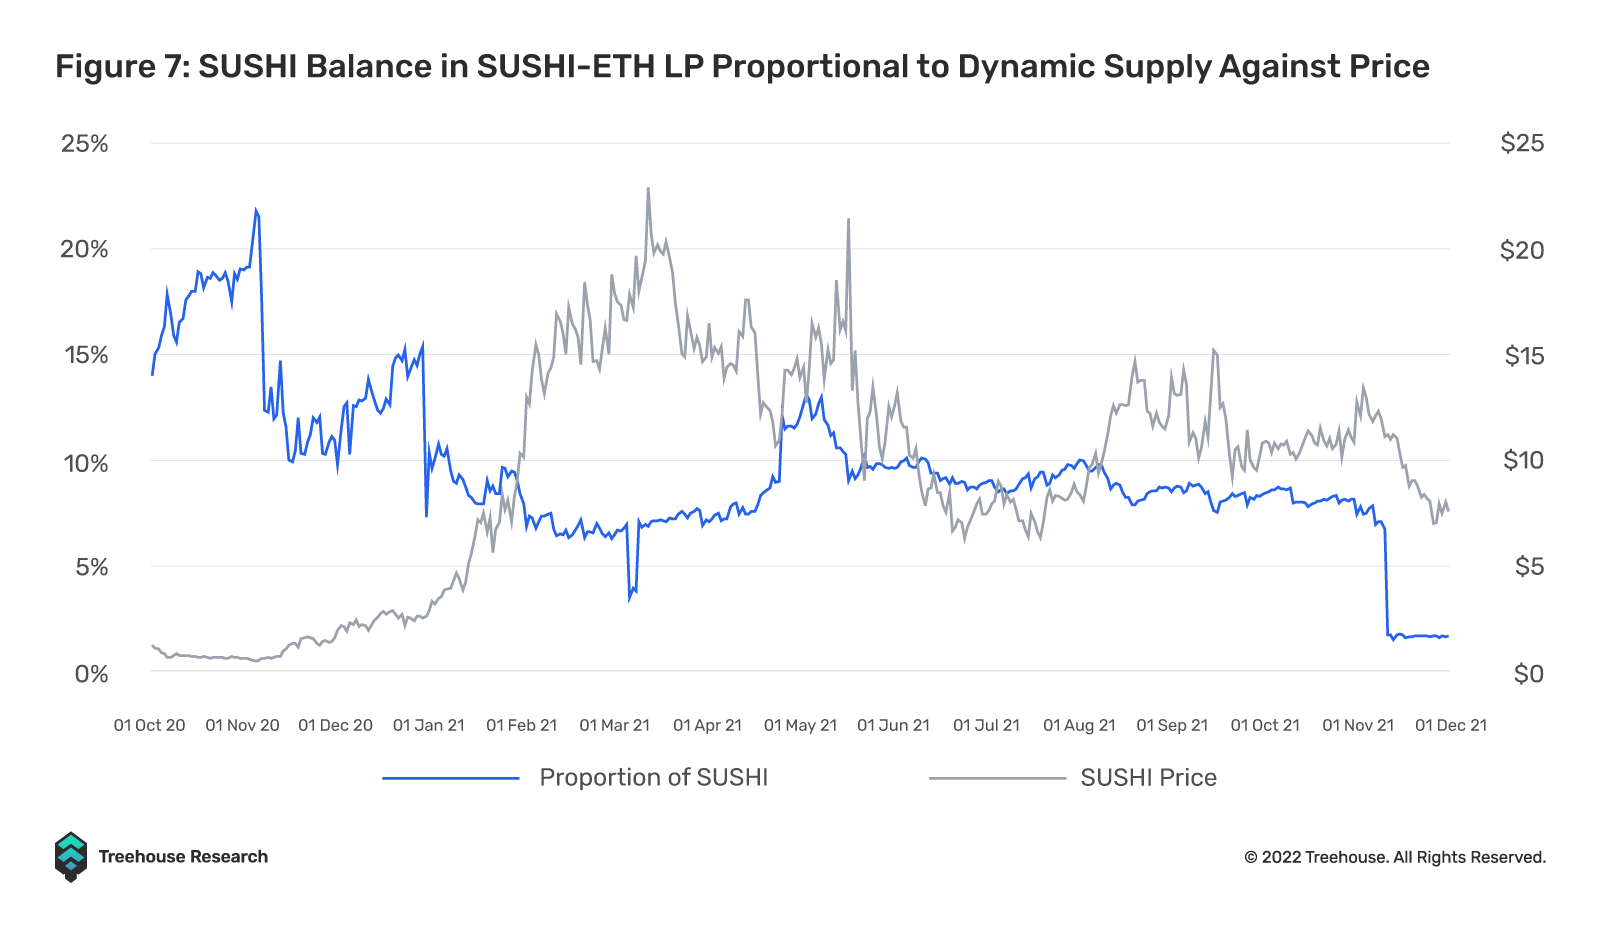 SUSHI balance in SUSHI-ETH LP proportional to dynamic supply against price 